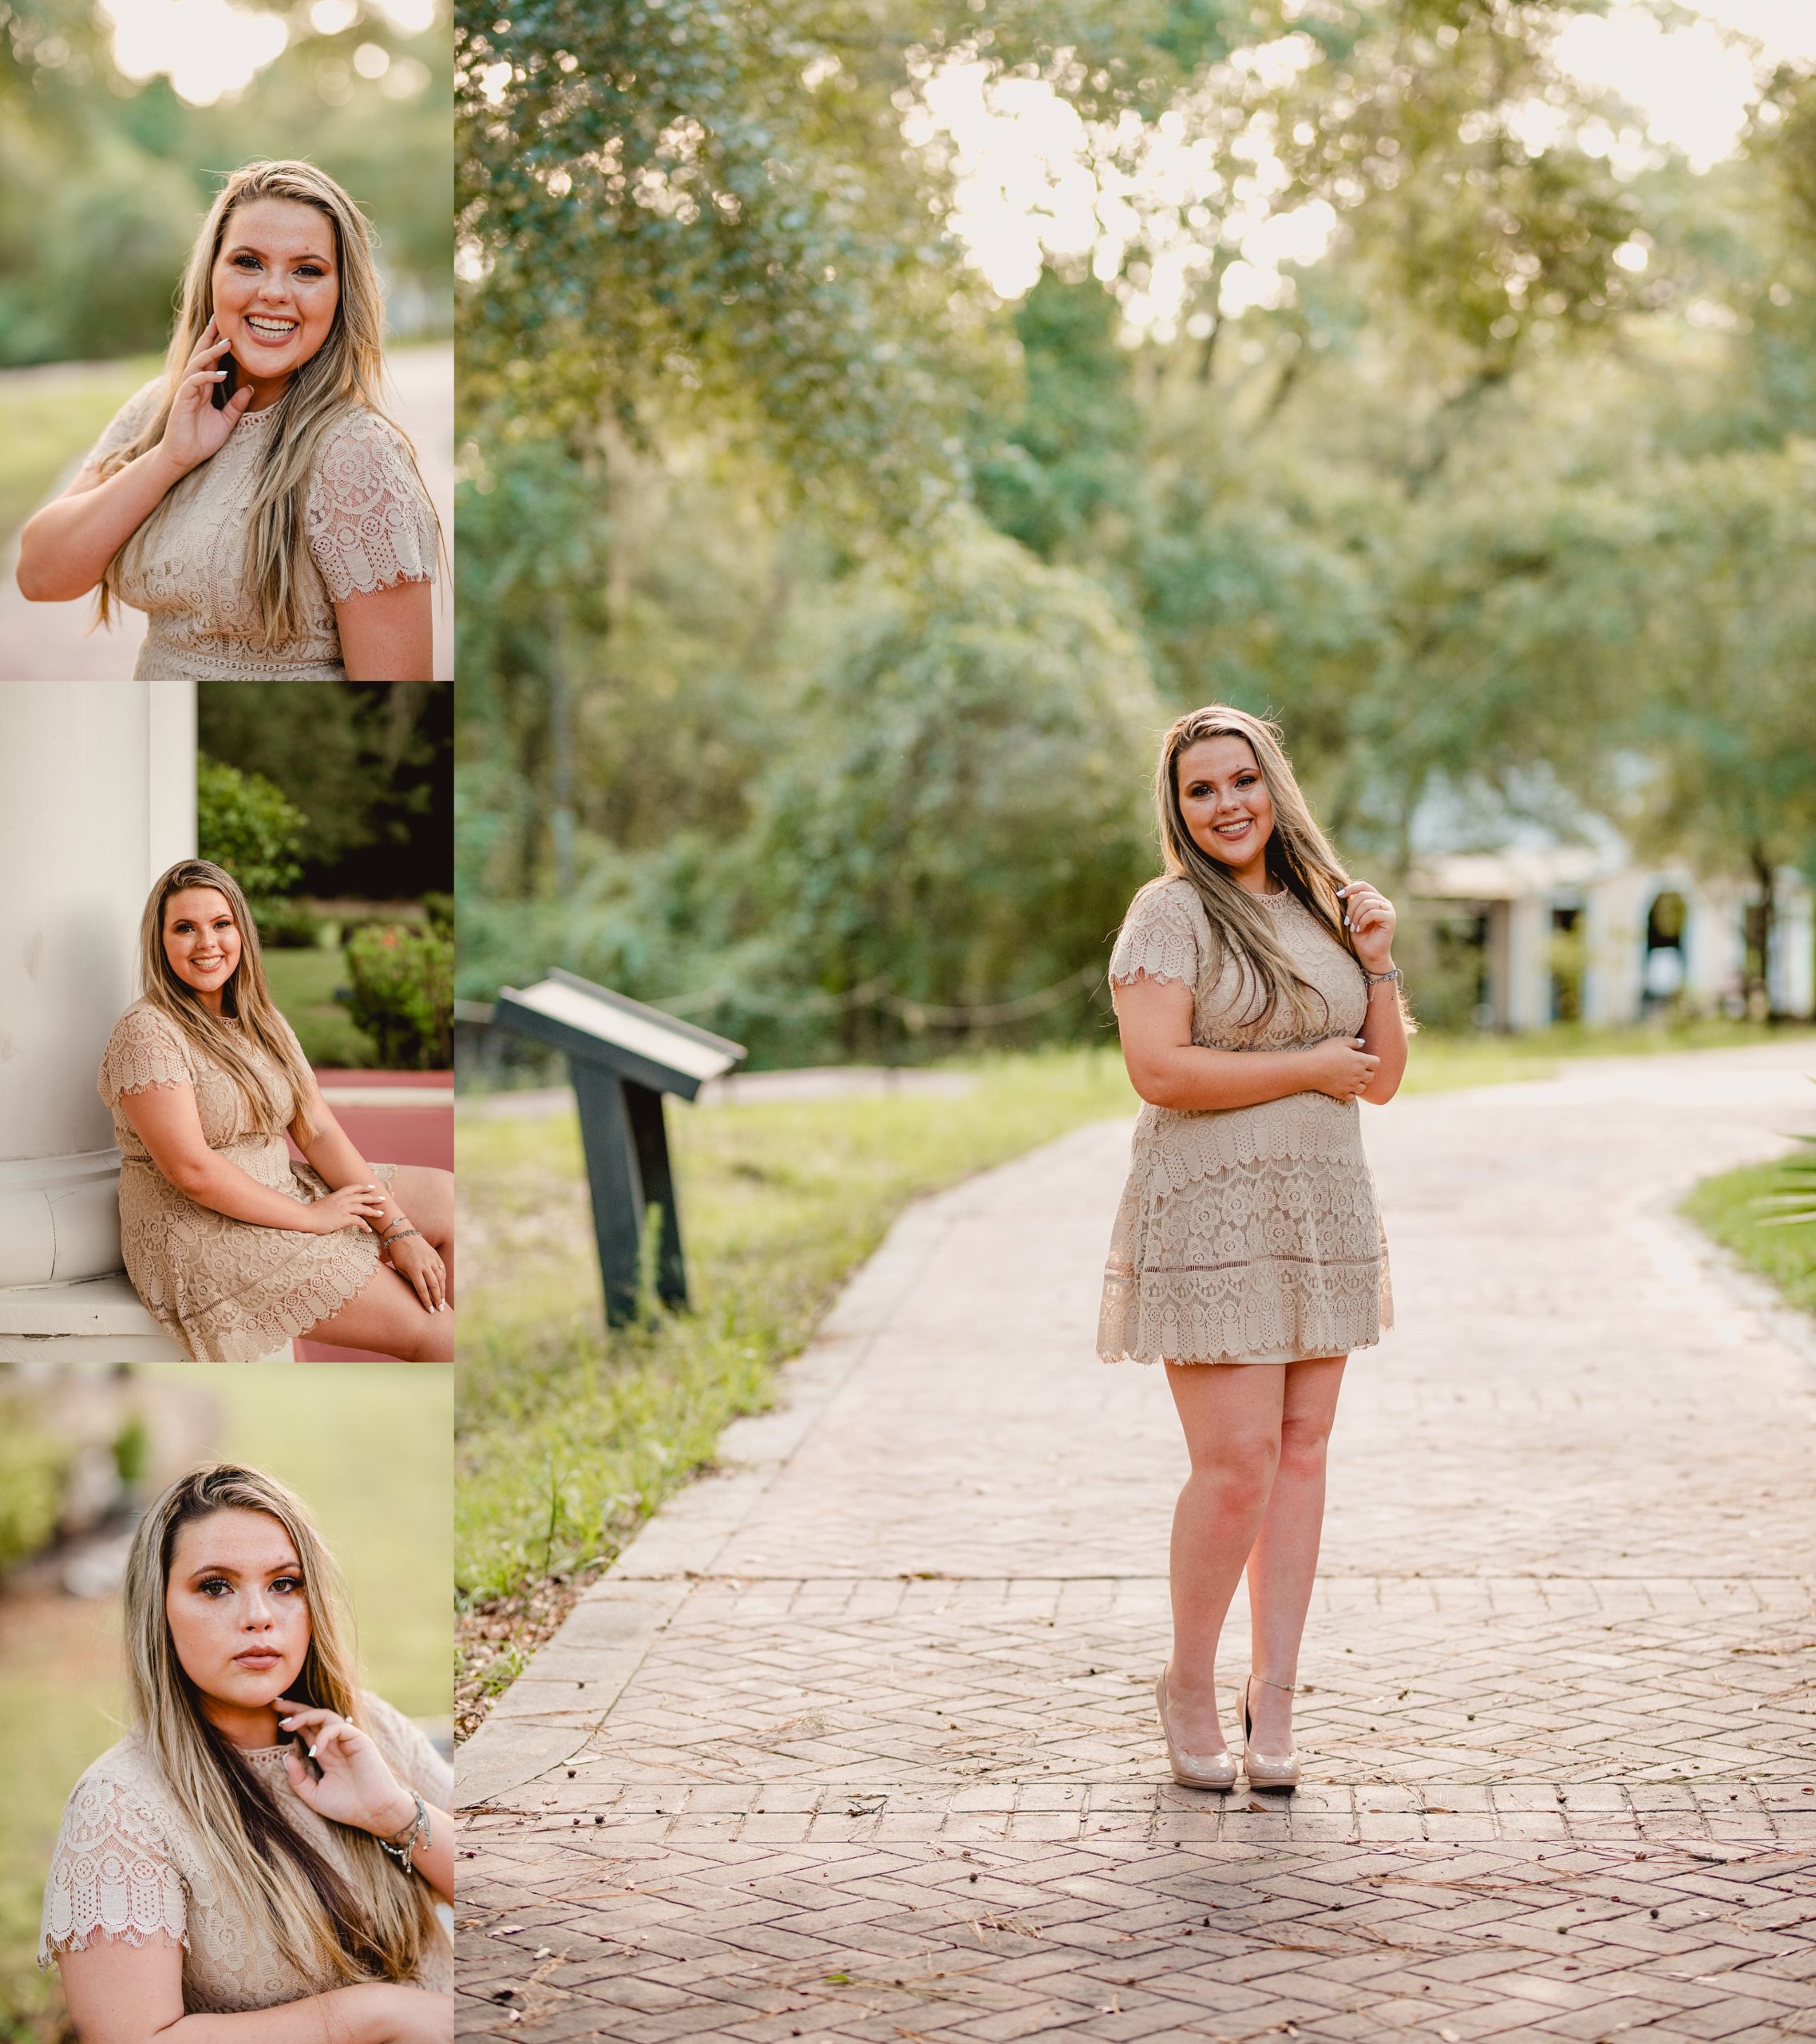 Senior pictures at Stephen Foster state park in Florida.